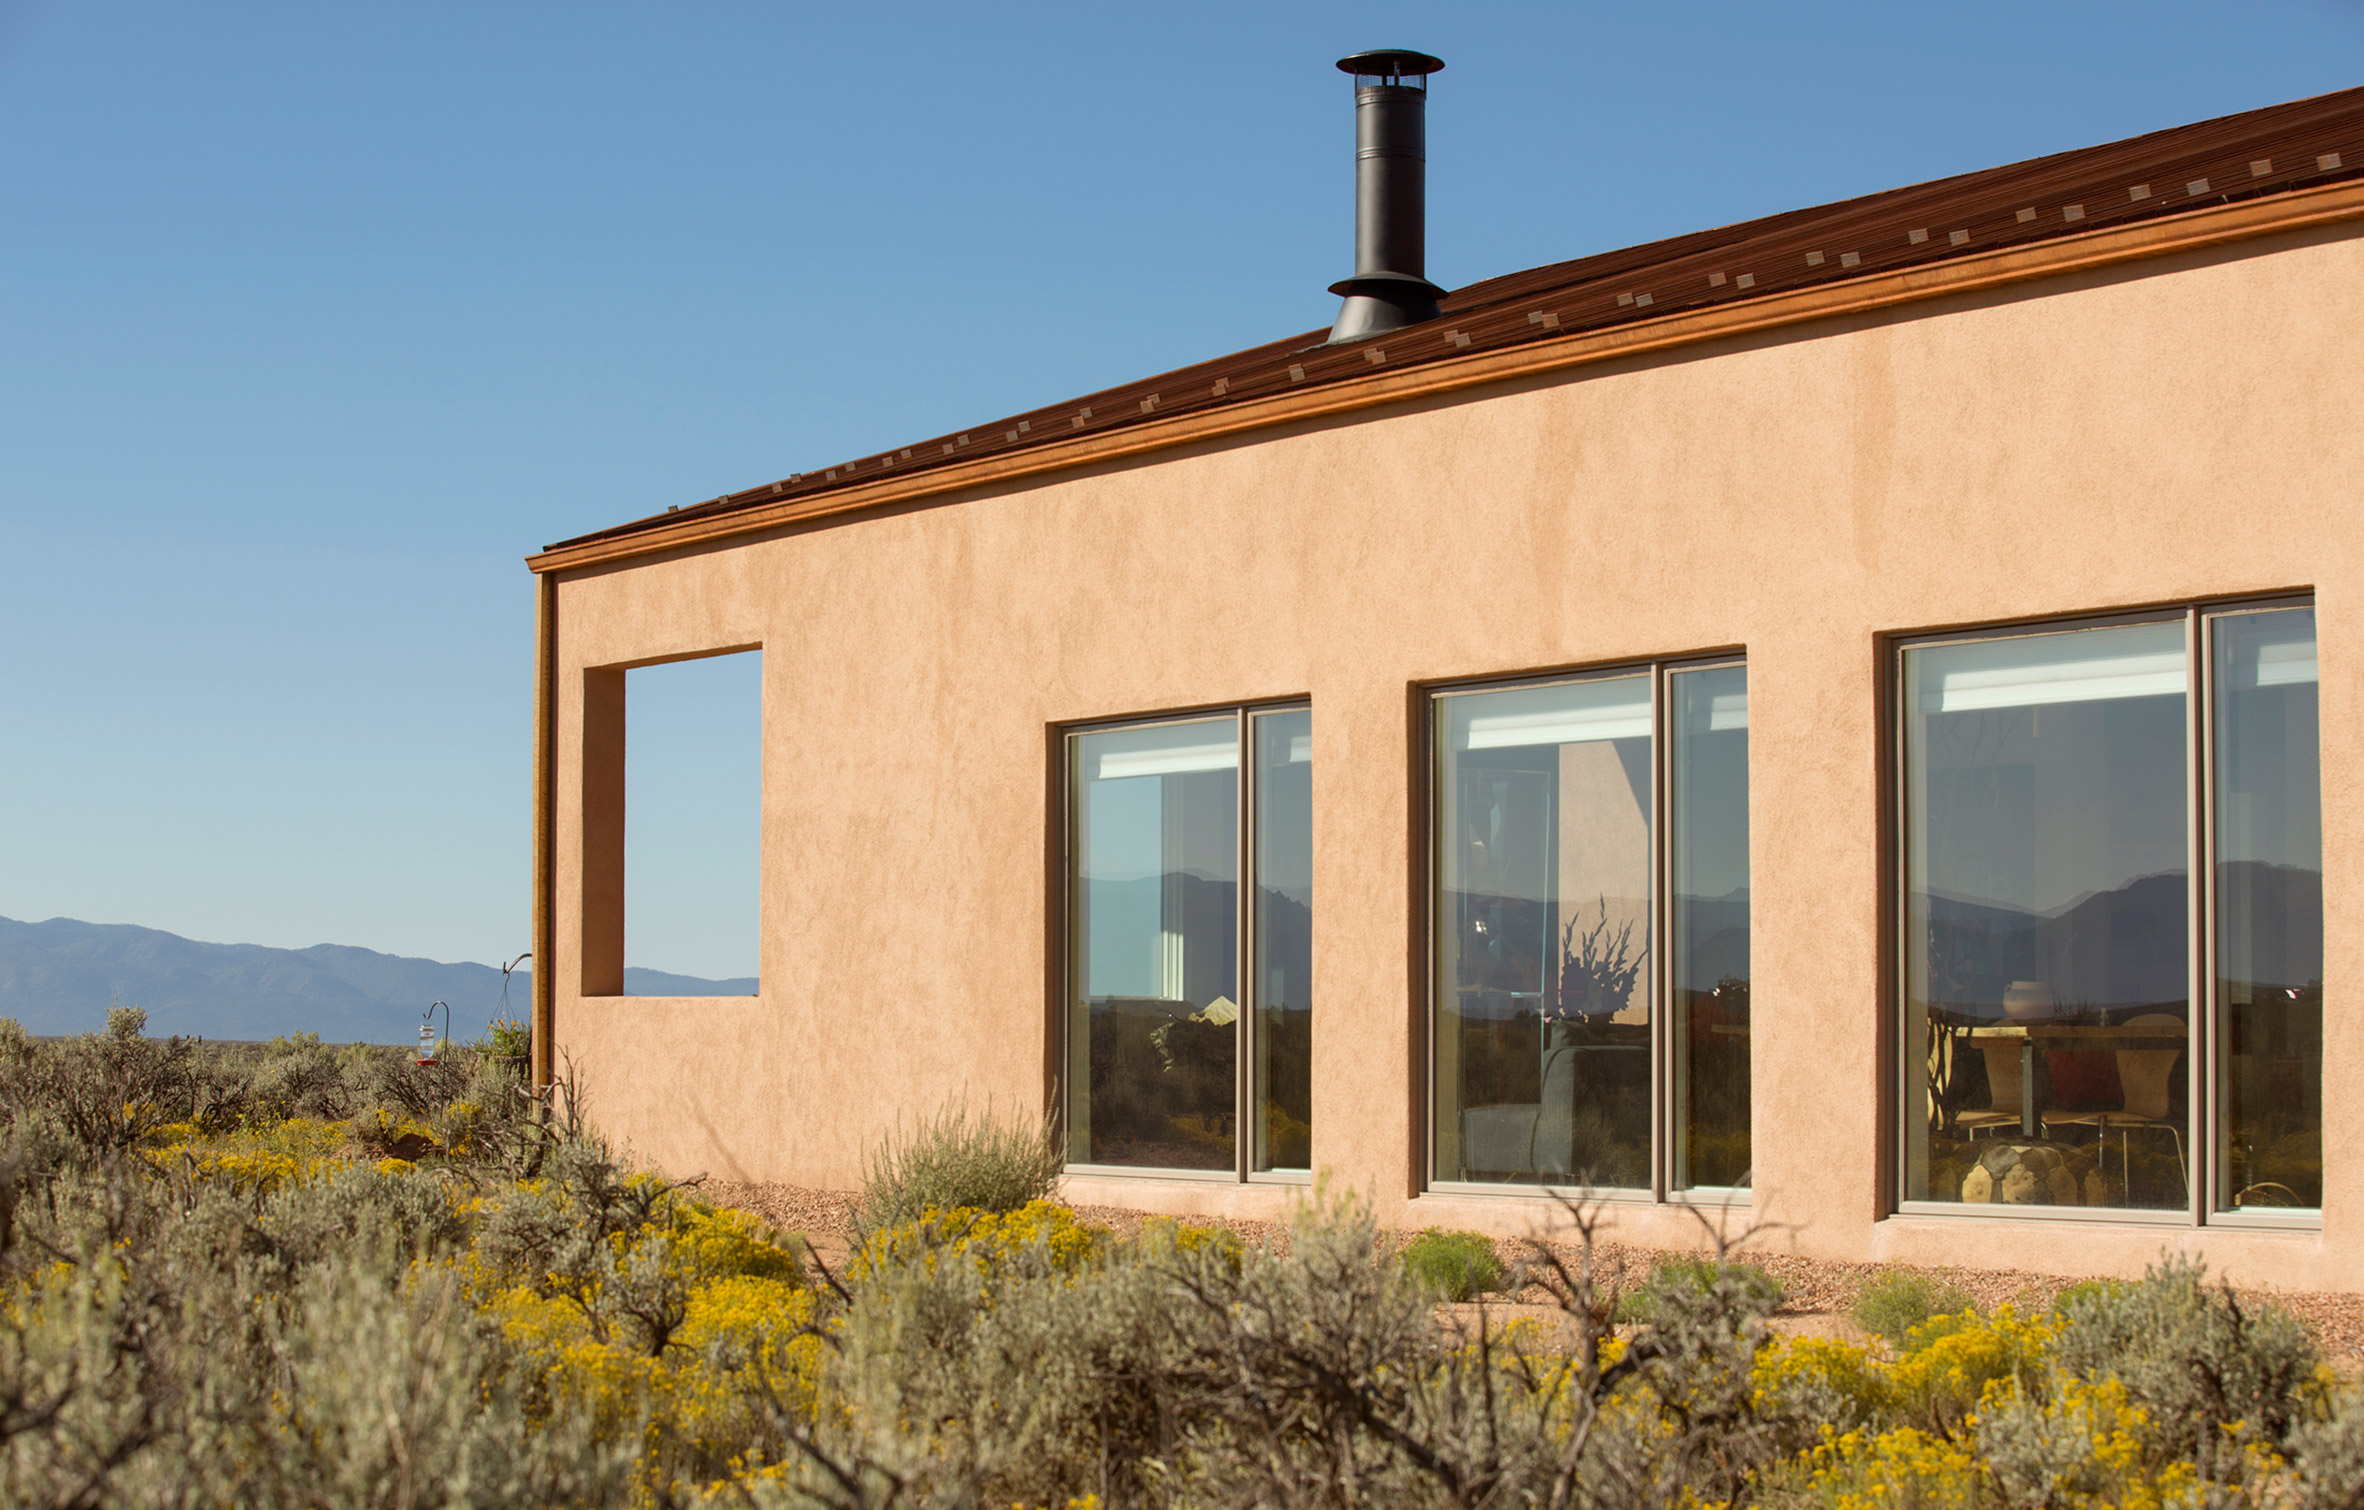 New Mexico home by Mollhaus takes cues from adobe architecture and desert terrain